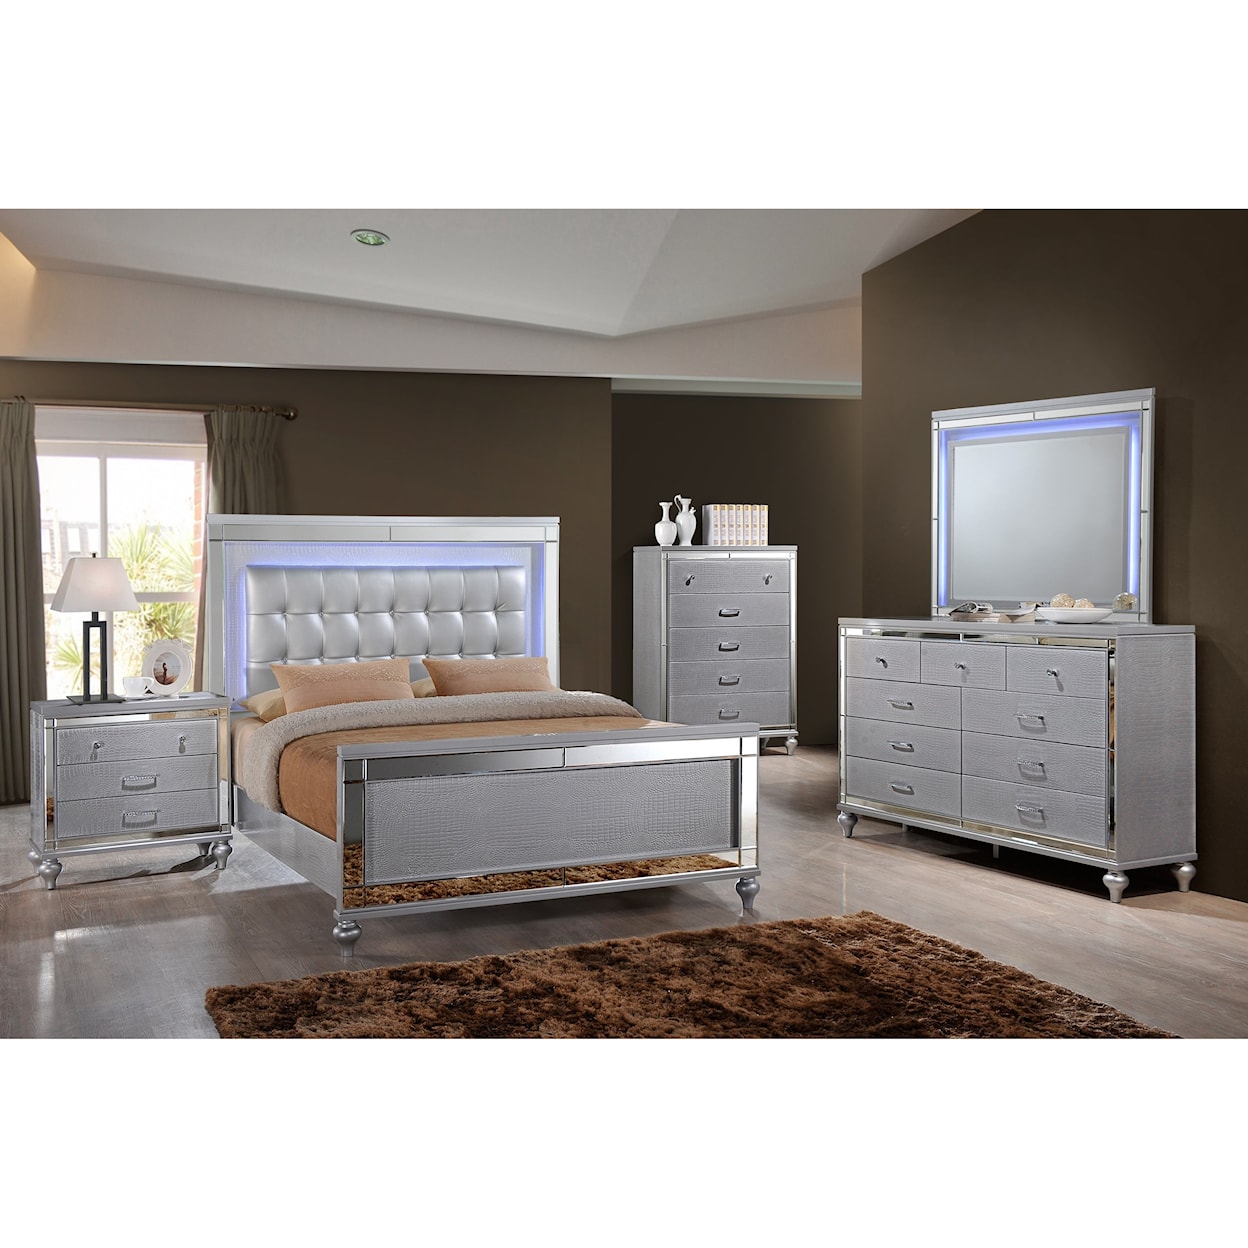 New Classic Milan MILAN SILVER 5 DRAWER CHEST |